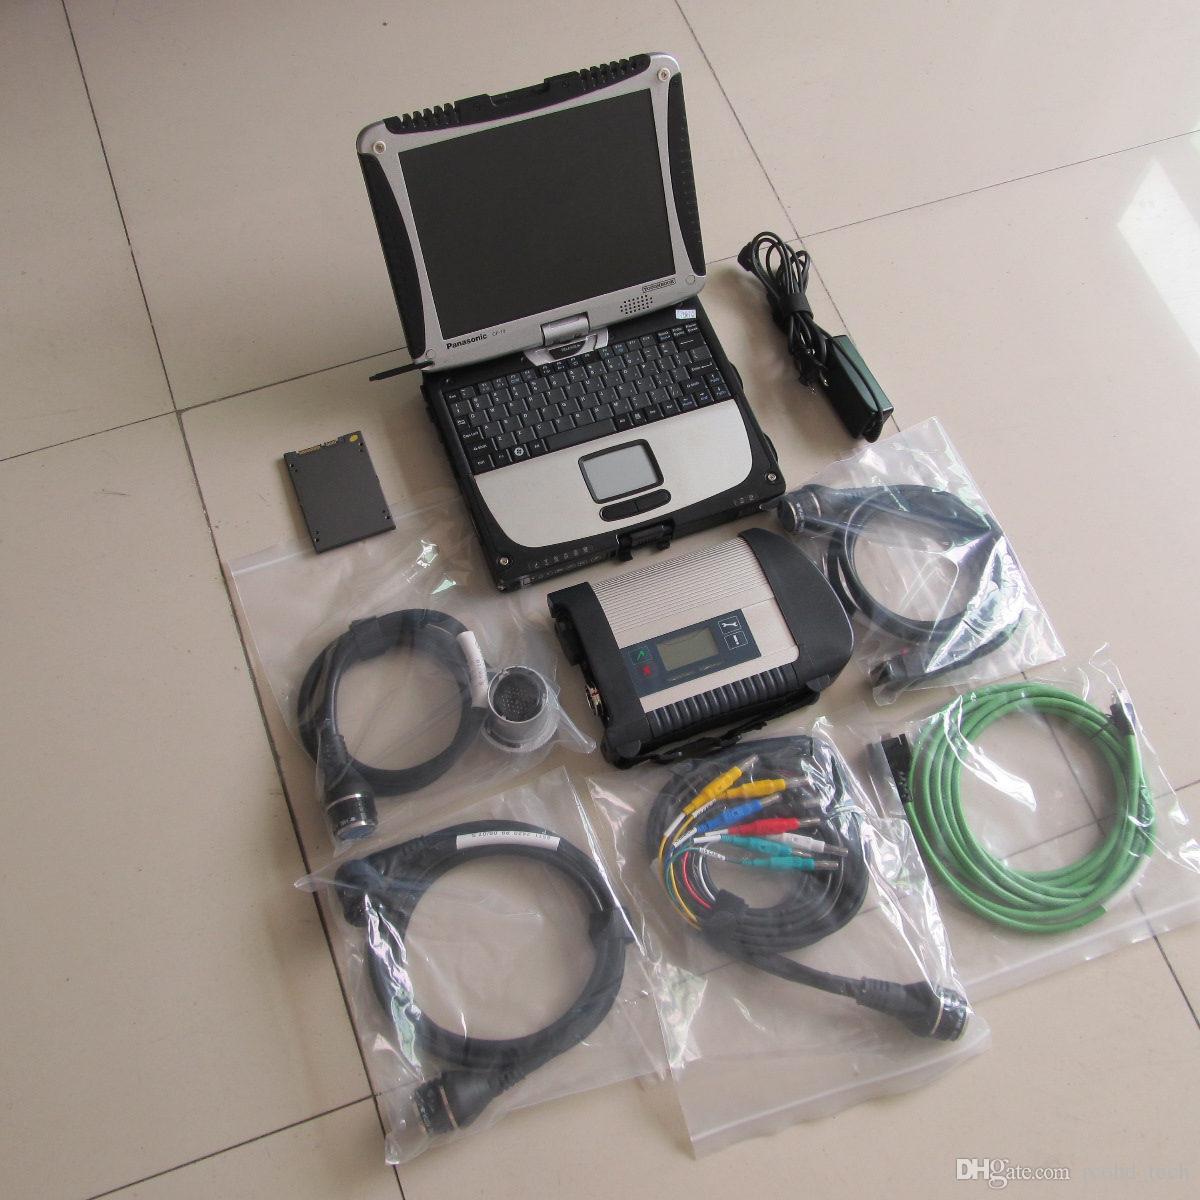 mb star c4 sd connect diagnosis TOOL doip super SSD 480GB +laptop Rotate Screen Toughbook CF-19 Diagnostic PC i5 cpu